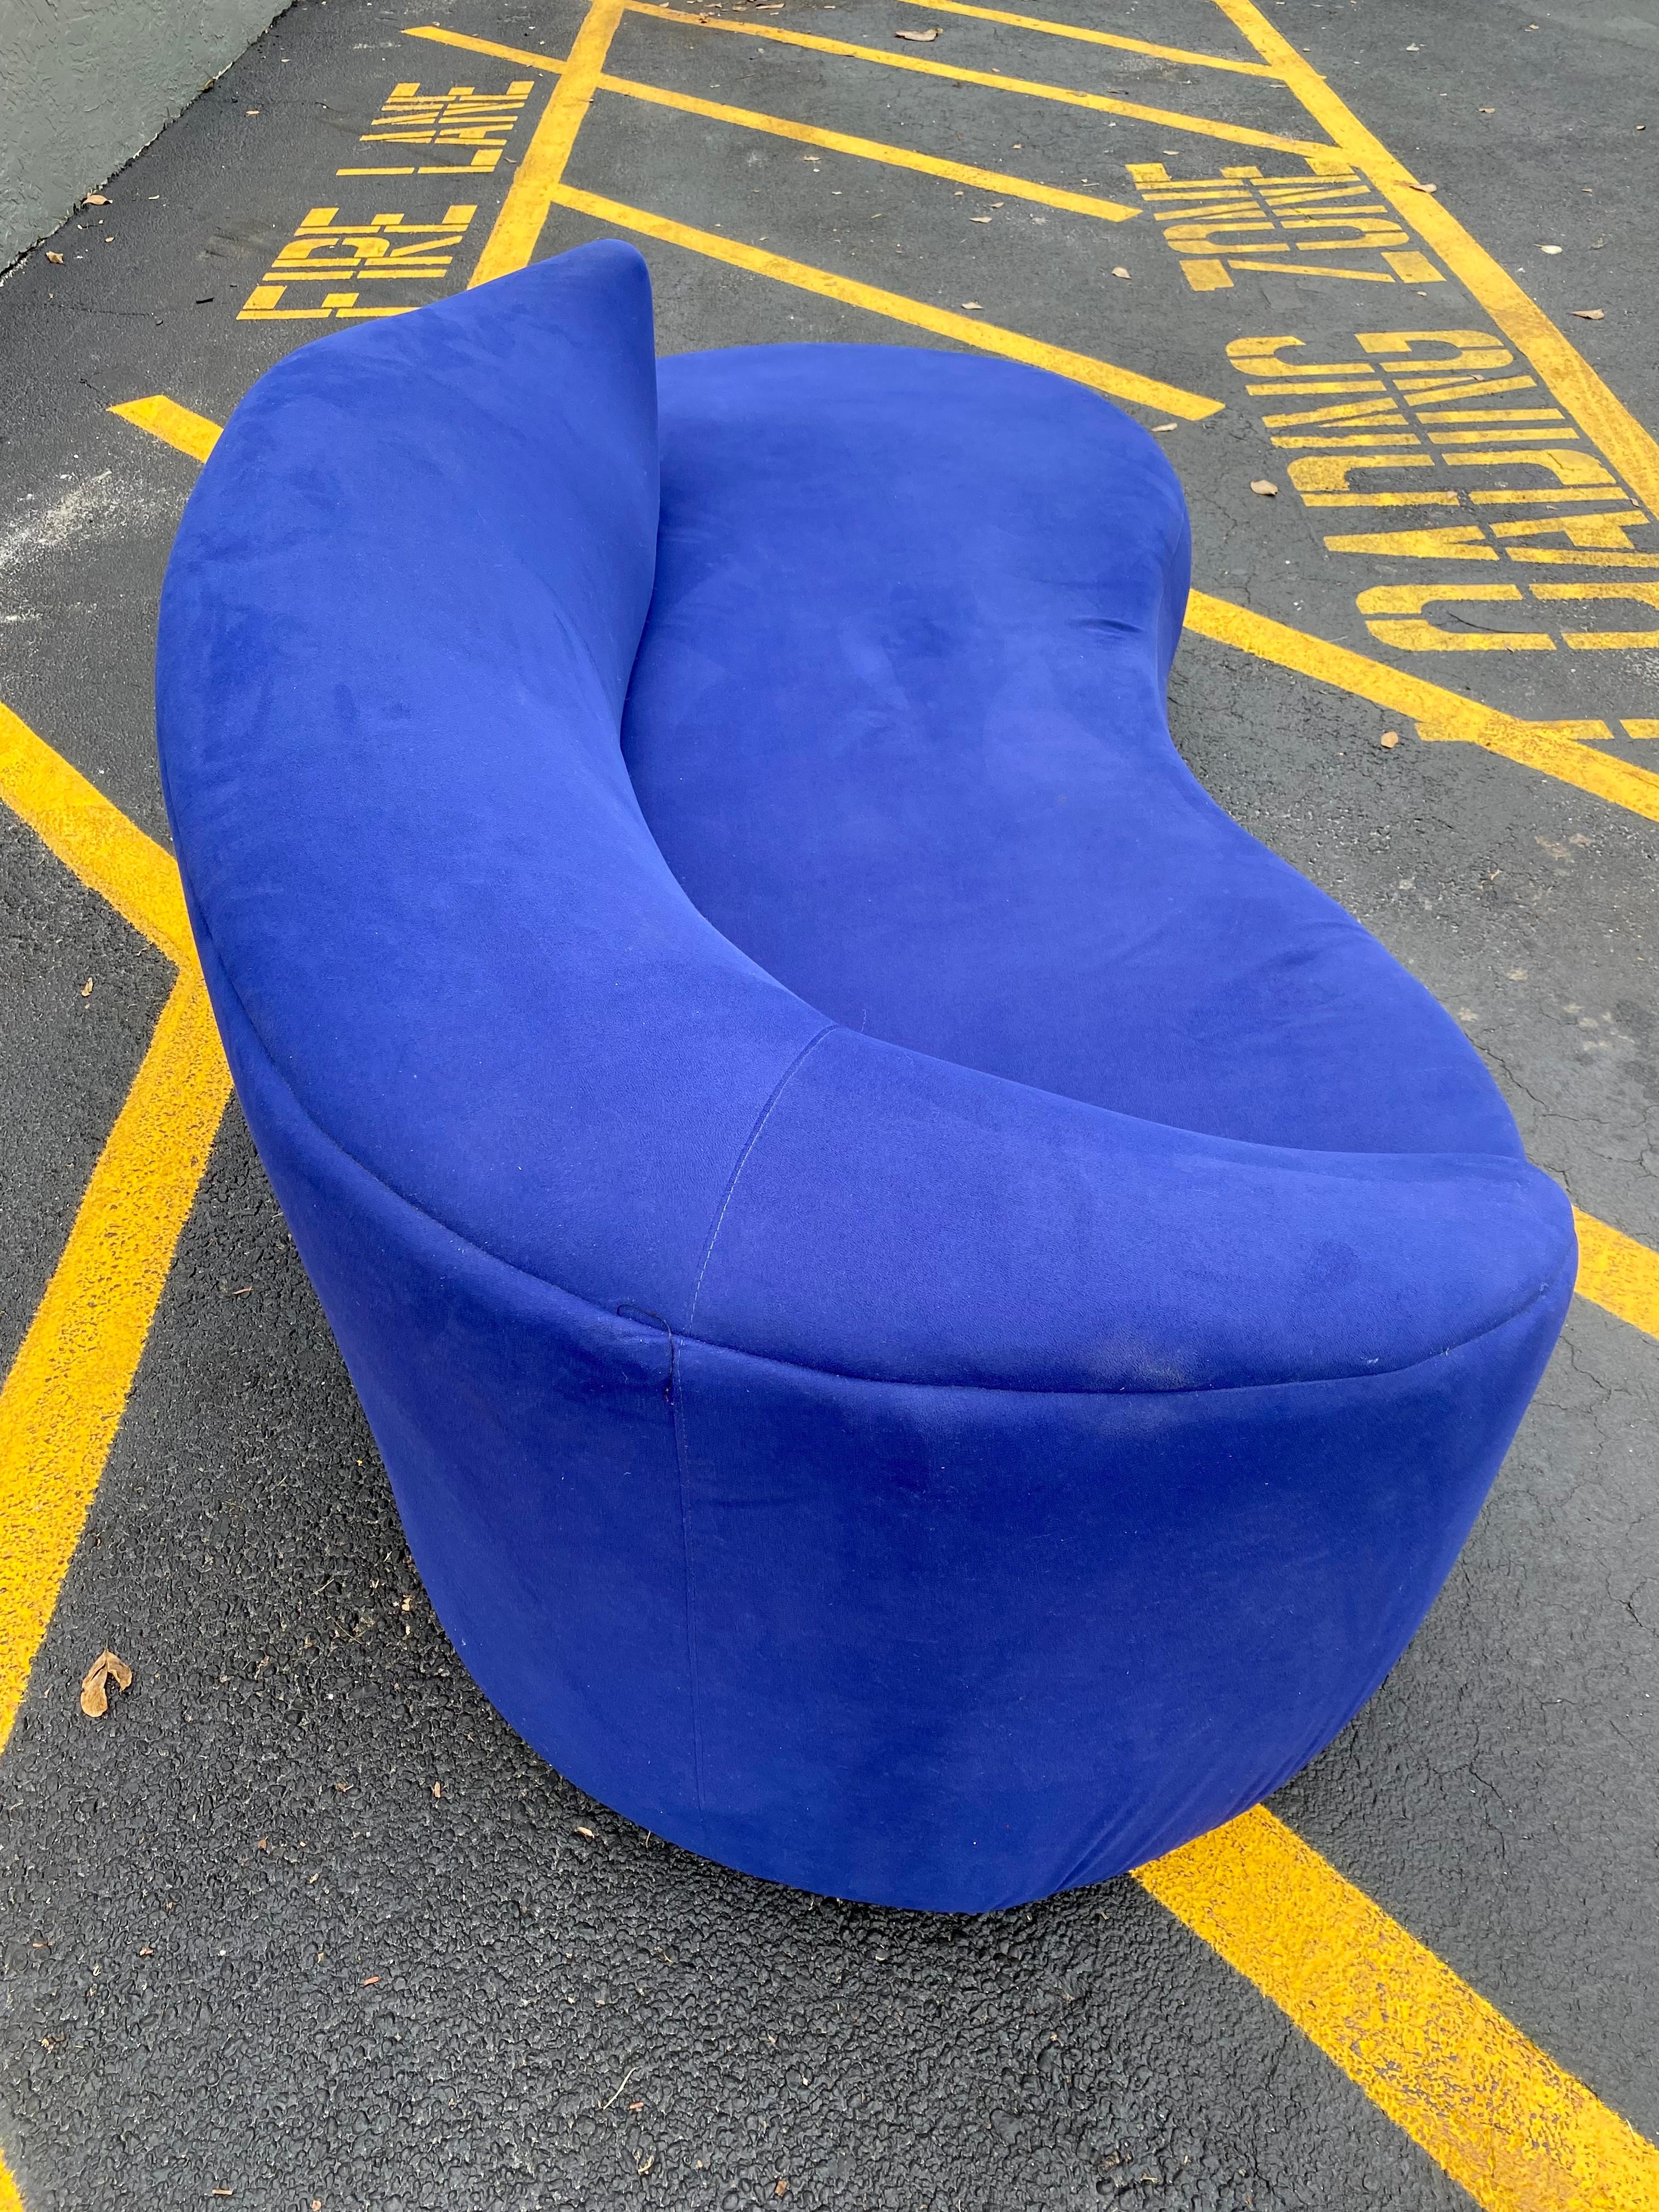 American 1990s Weiman Royal Blue Cloud Serpentine Sofa For Sale